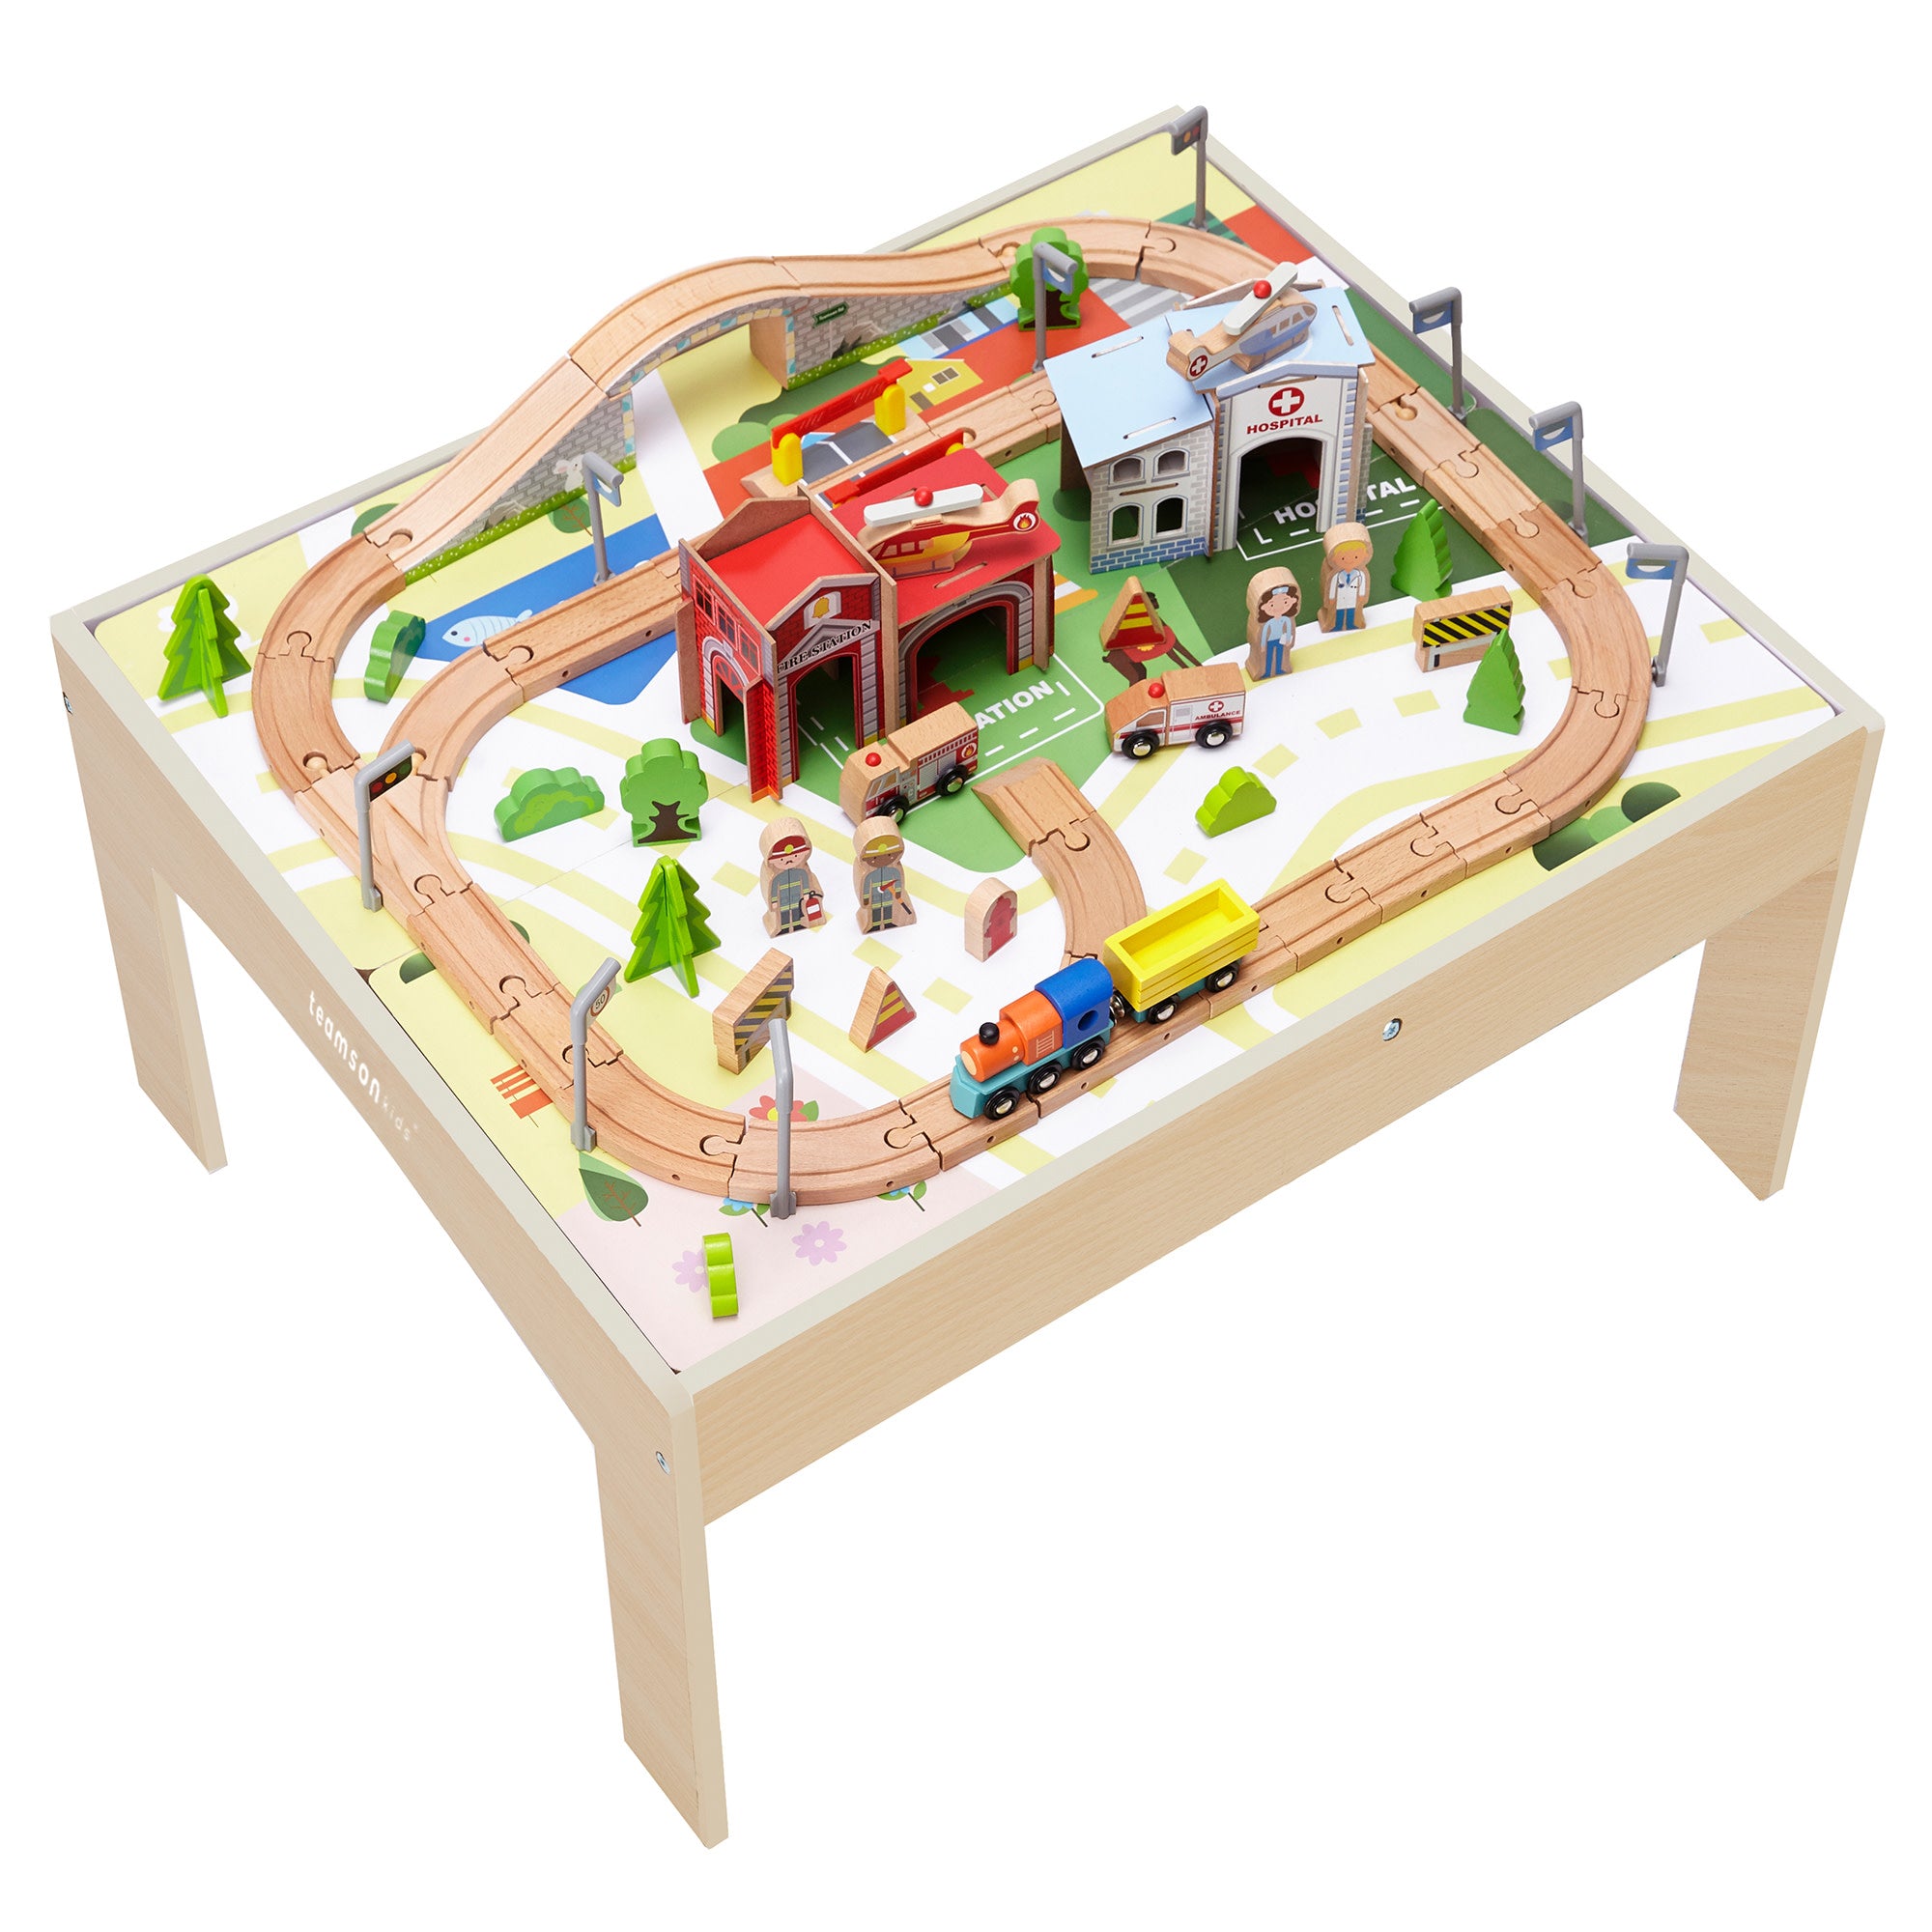 Teamson Kids Preschool Play Lab Toys Wooden Table with 85-pc Train and Town Set, Natural